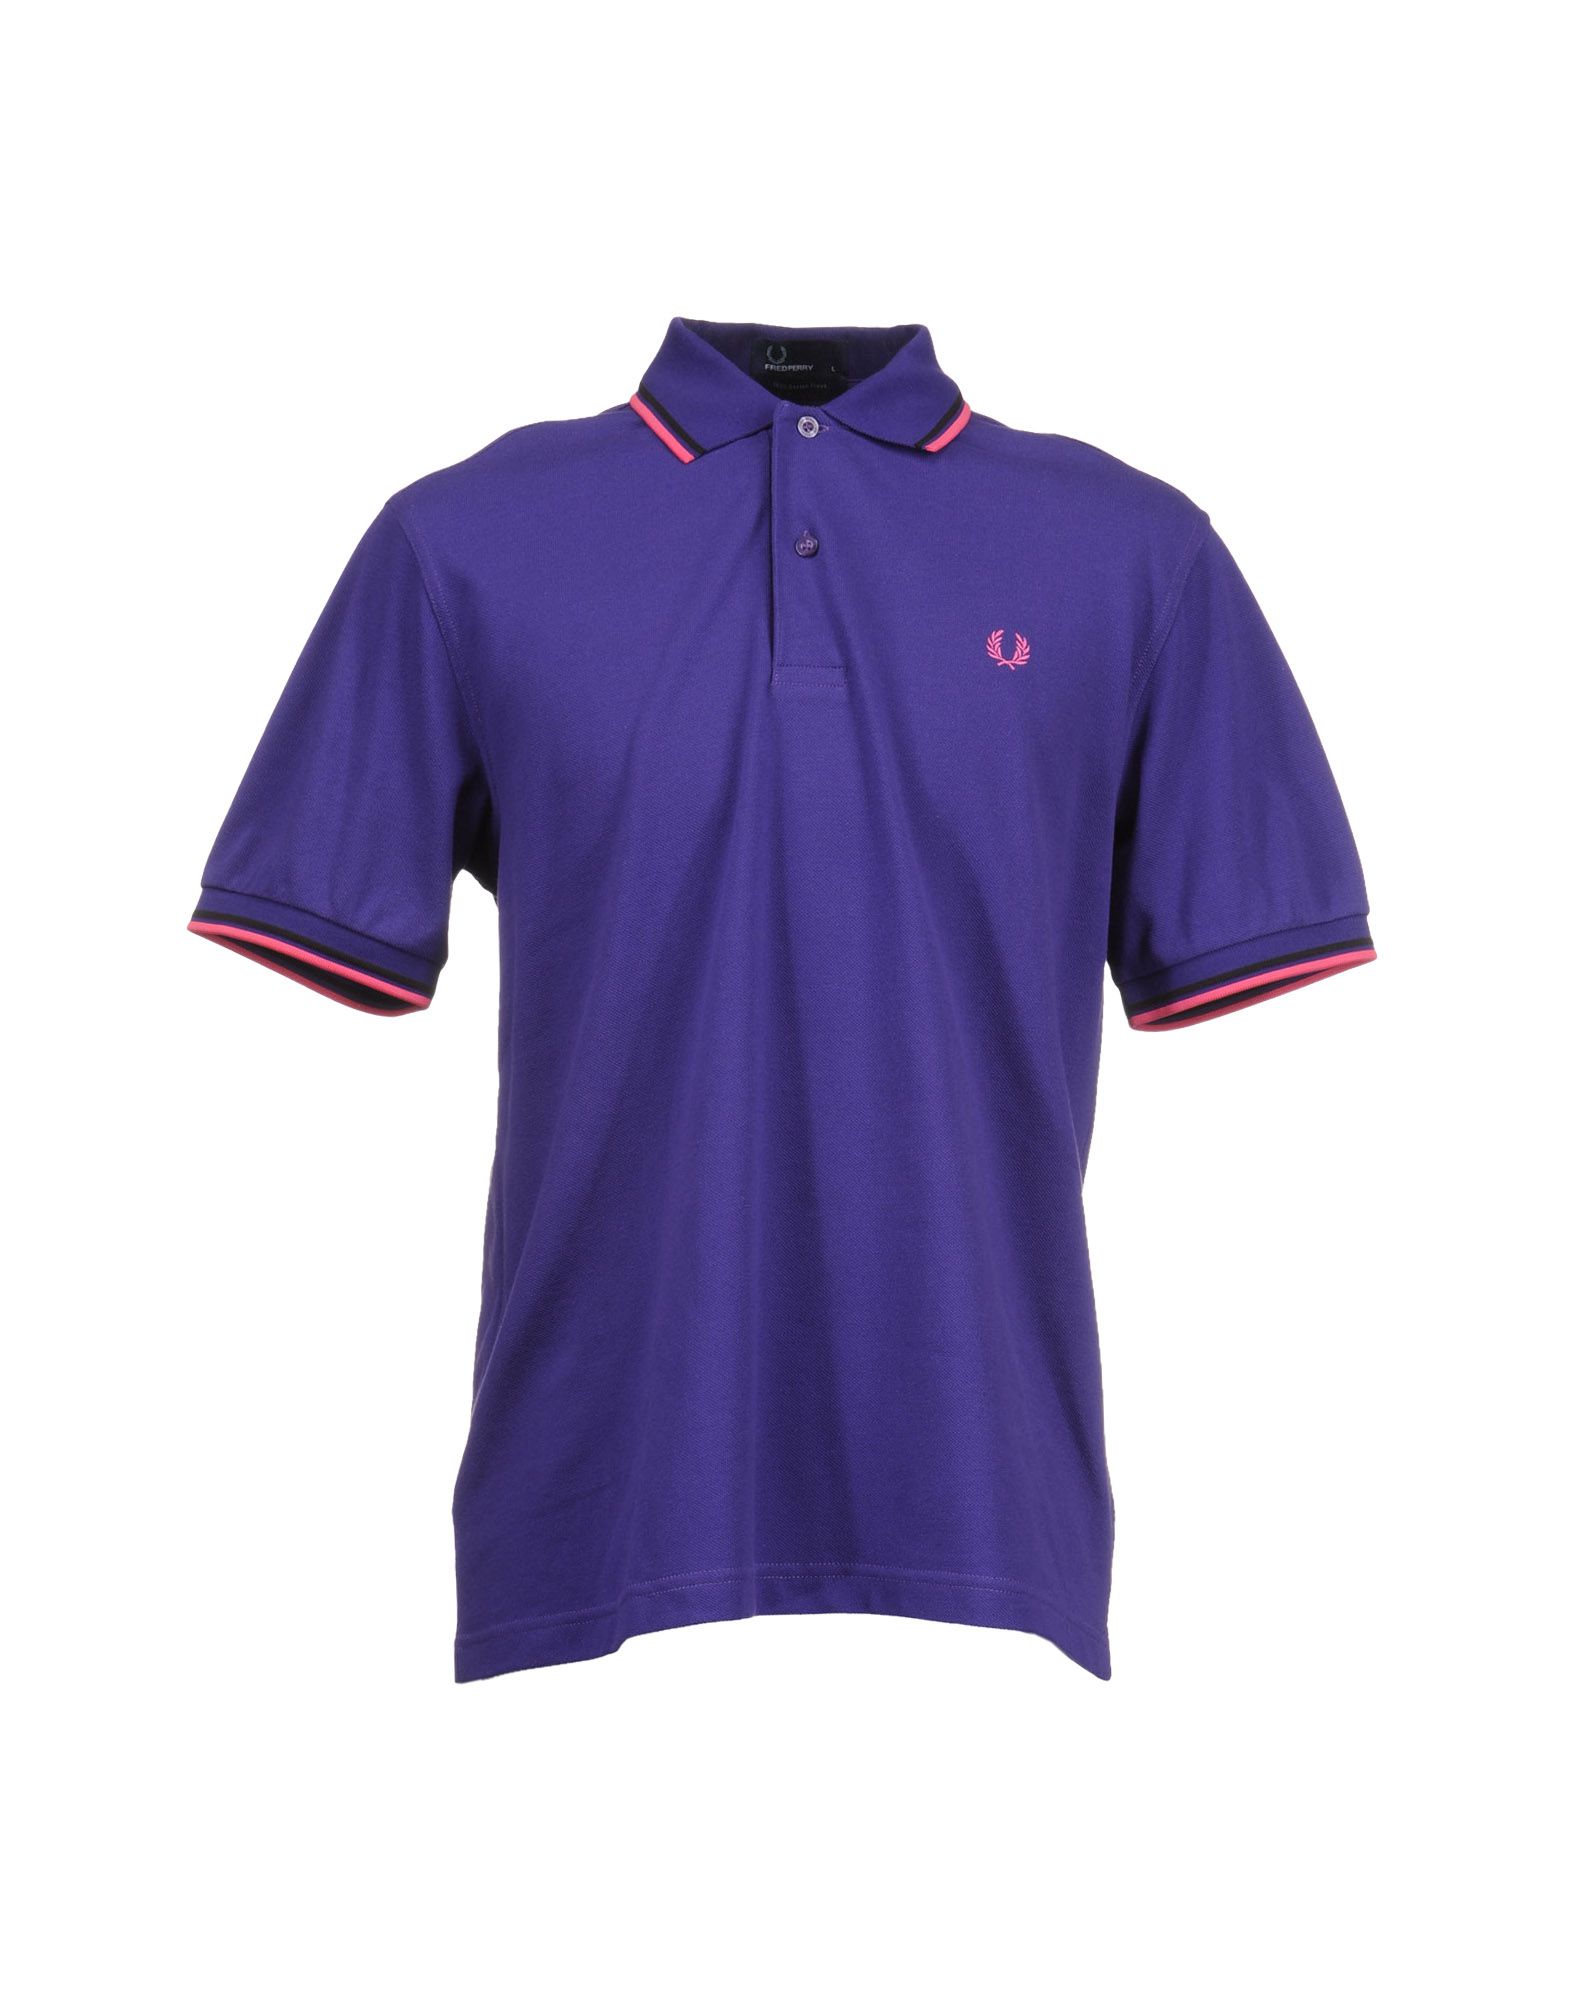 Foto fred perry polos
 foto 321555